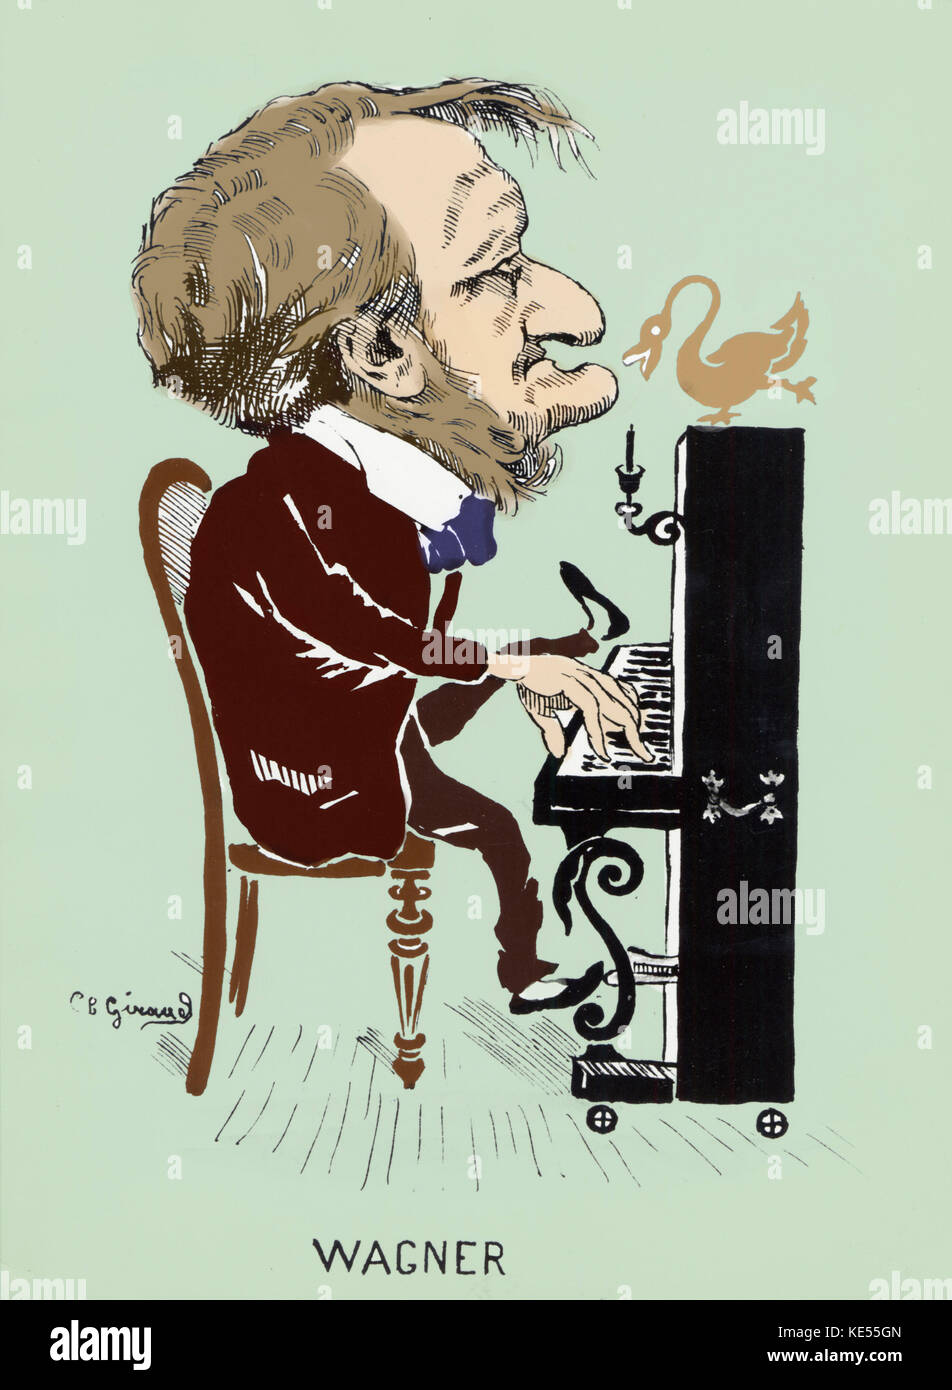 Richard Wagner improvising on the piano with a swan dancing on the piano in time - Lohengrin connection. German composer & author, 22 May 1813 - 13 February 1883. Colourised version. Stock Photo